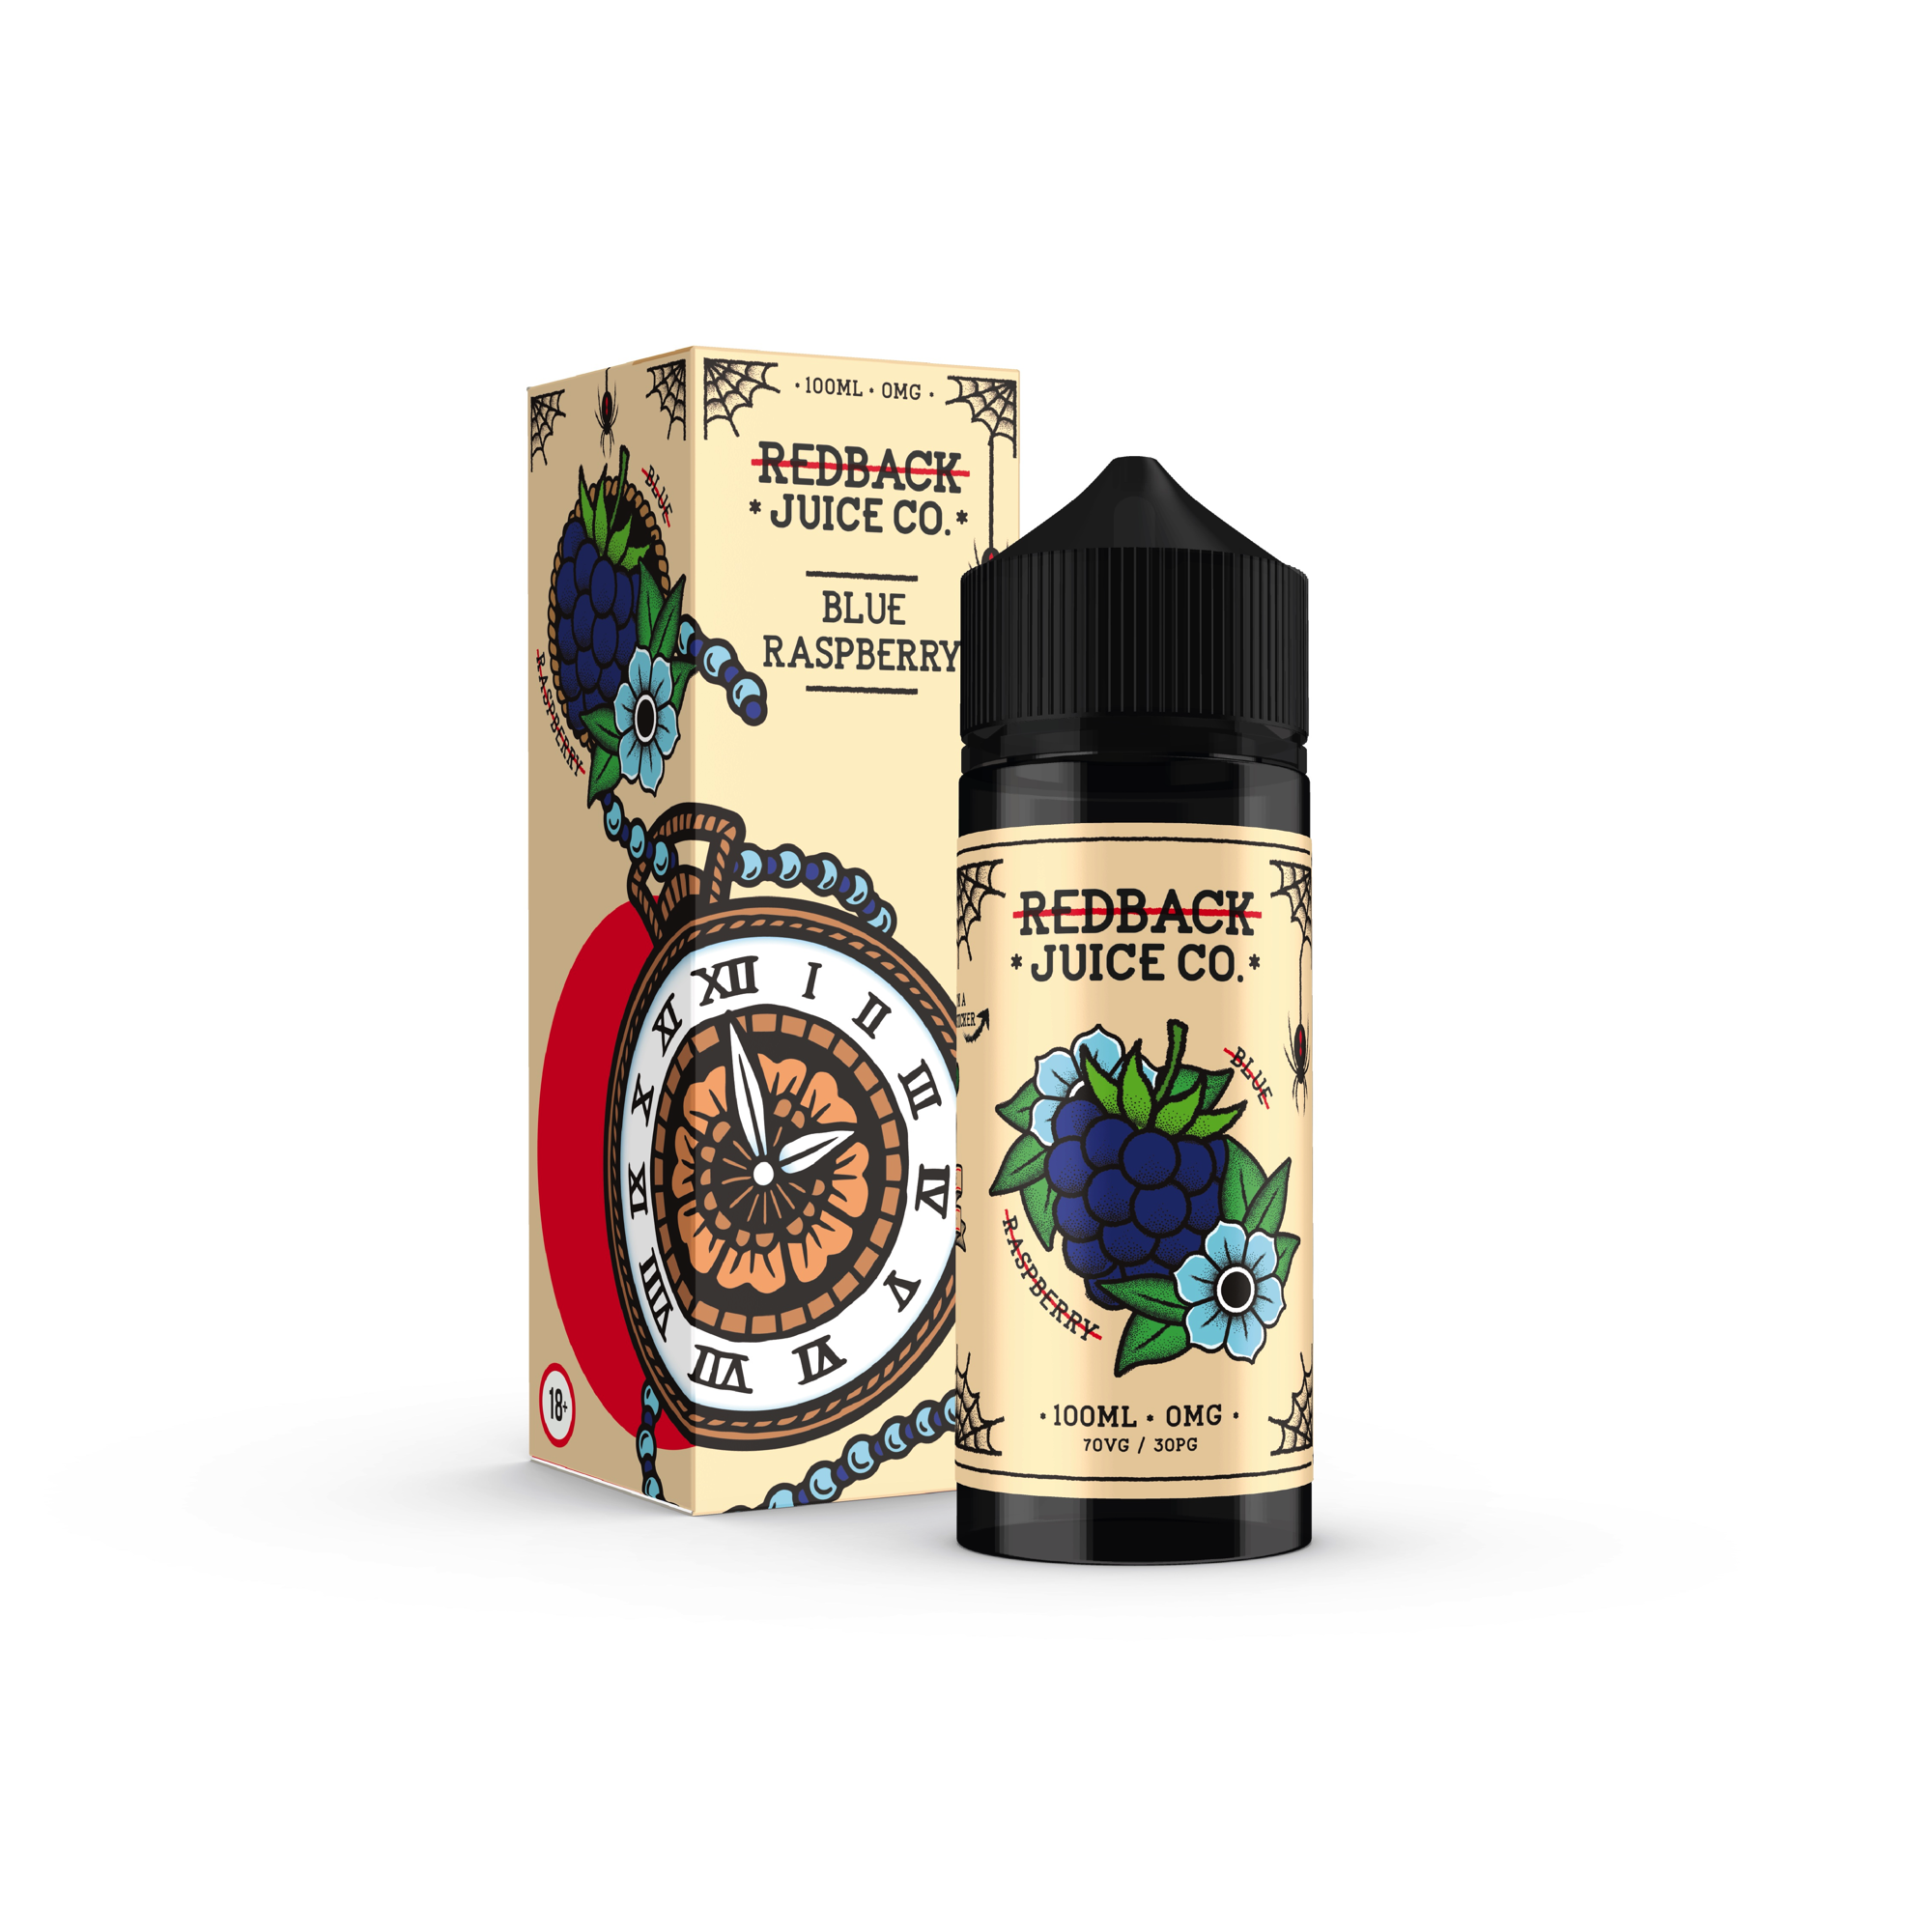 Blue Raspberry by Redback Juice Co Collection